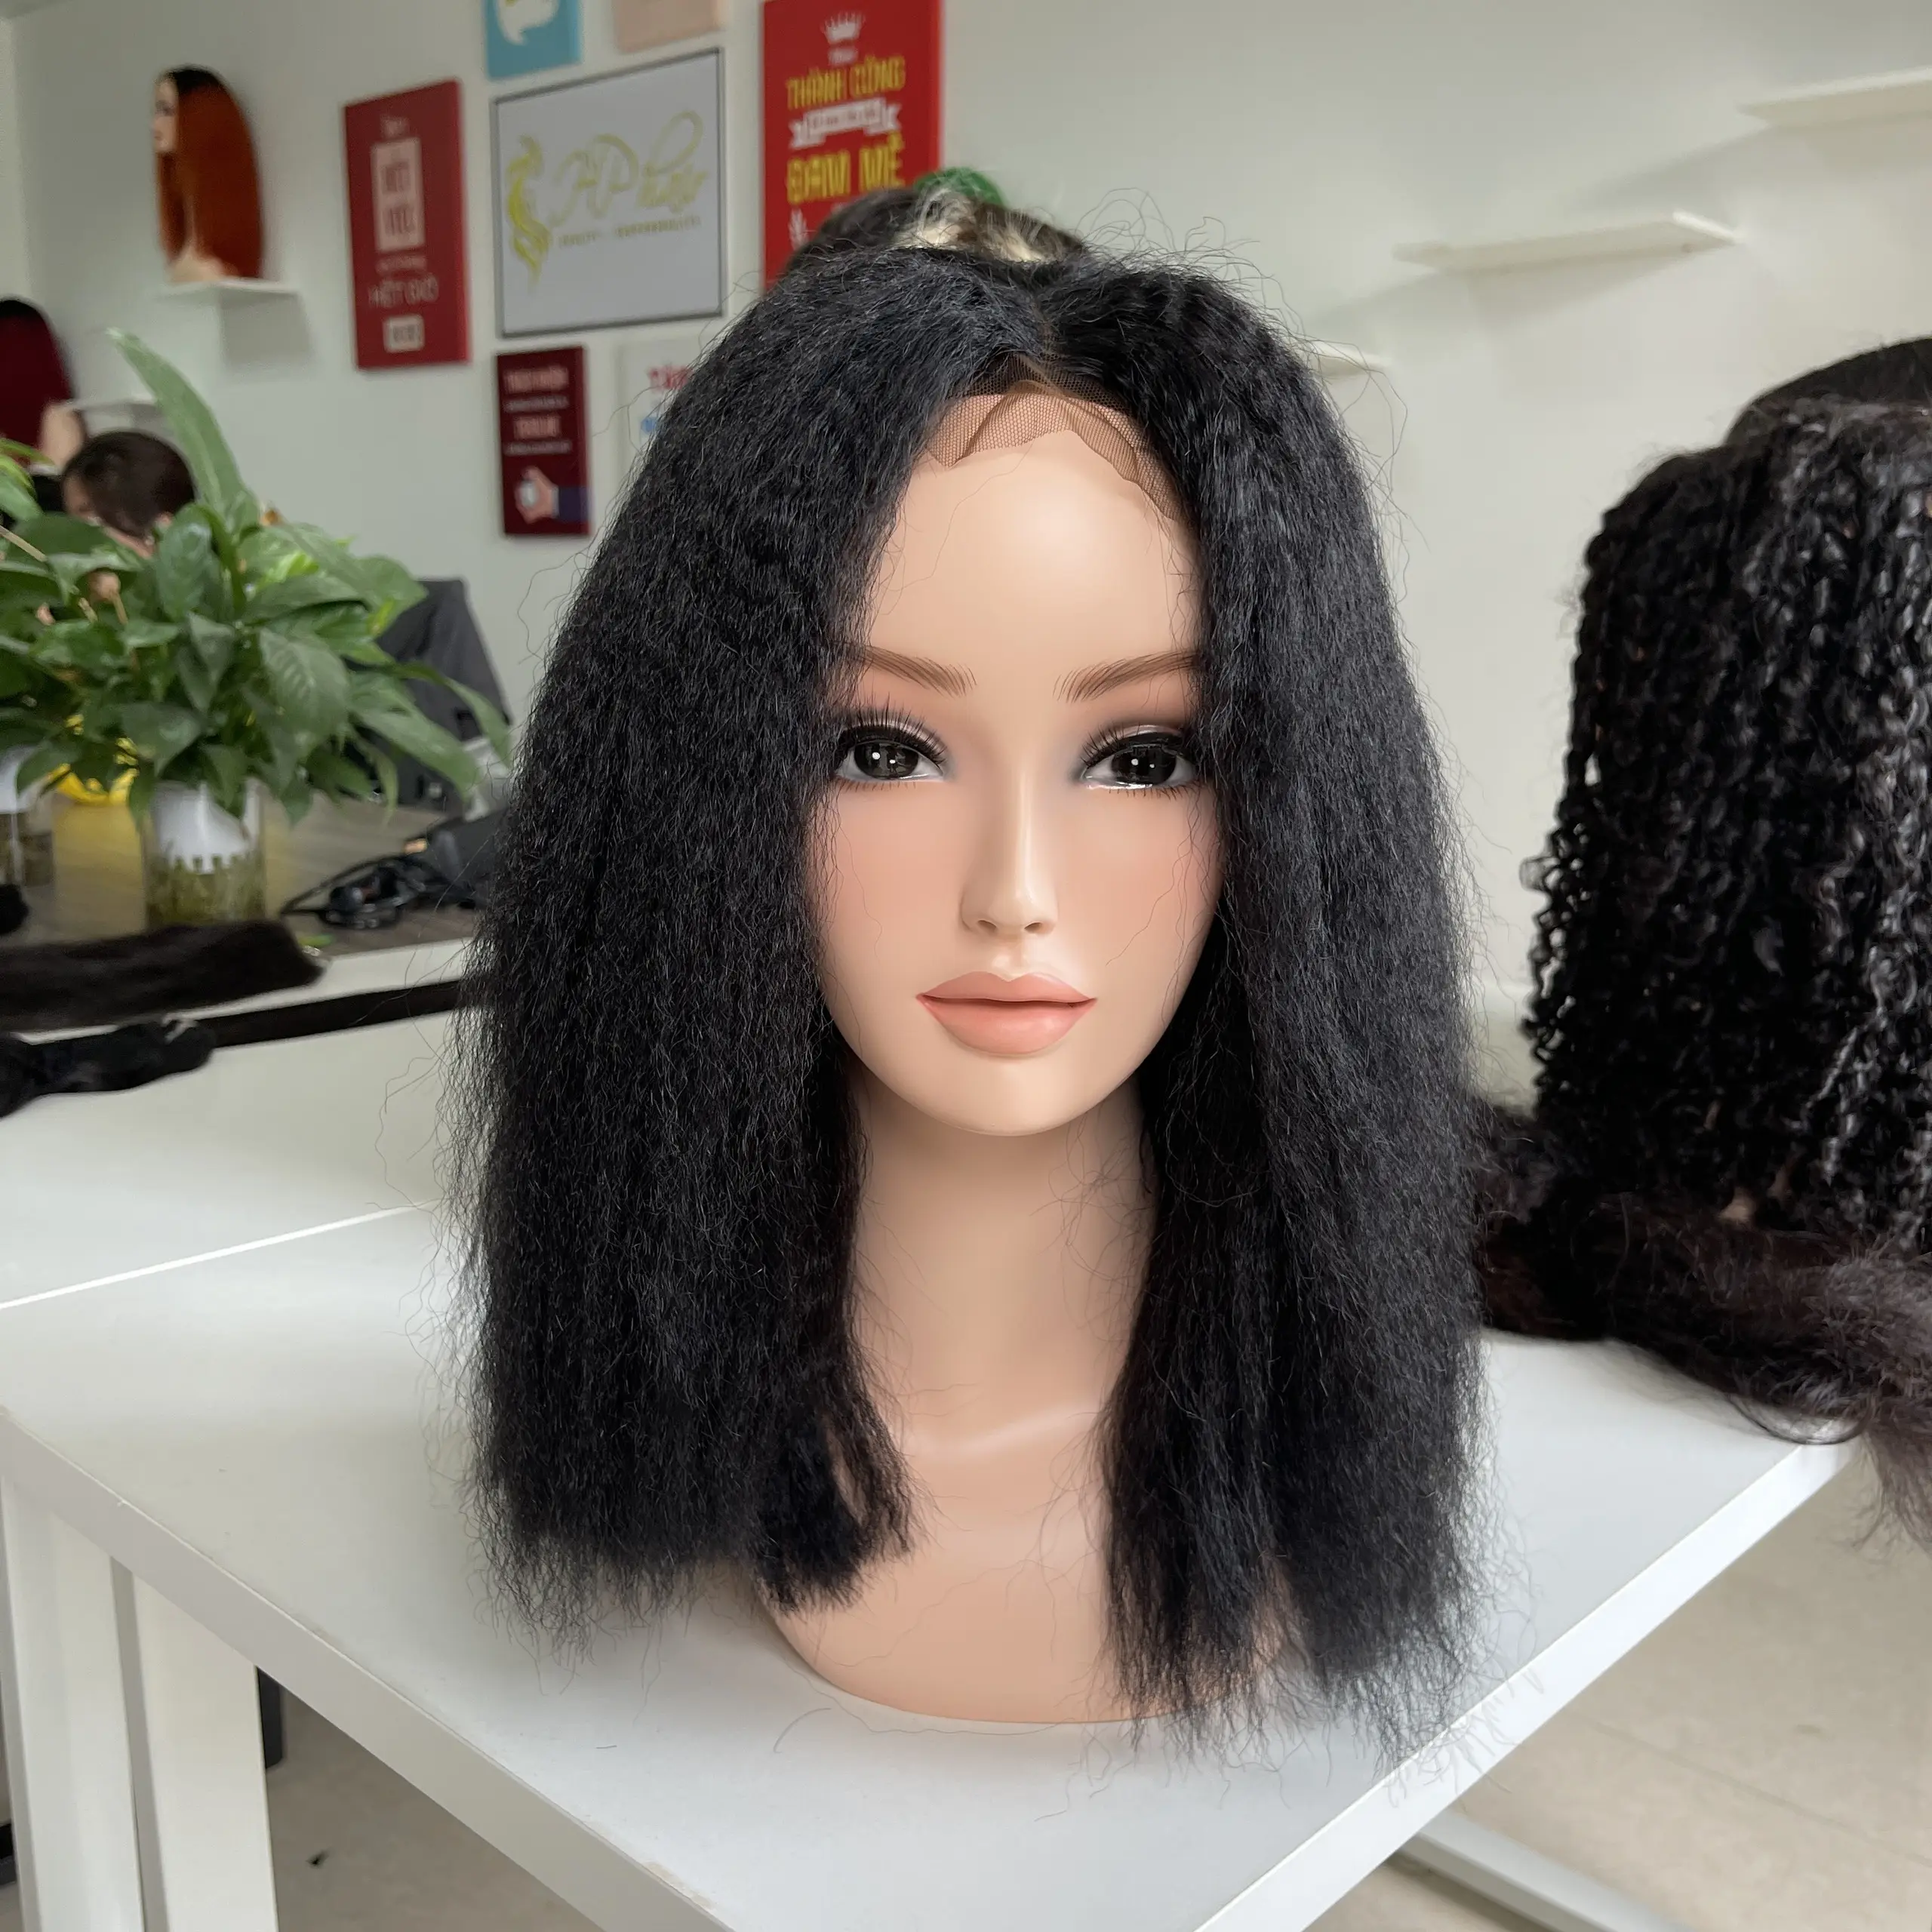 Short And Long Bob With Flat Bangs Wigs12 24 Inches Straight Curly Black Human Hair Wigs